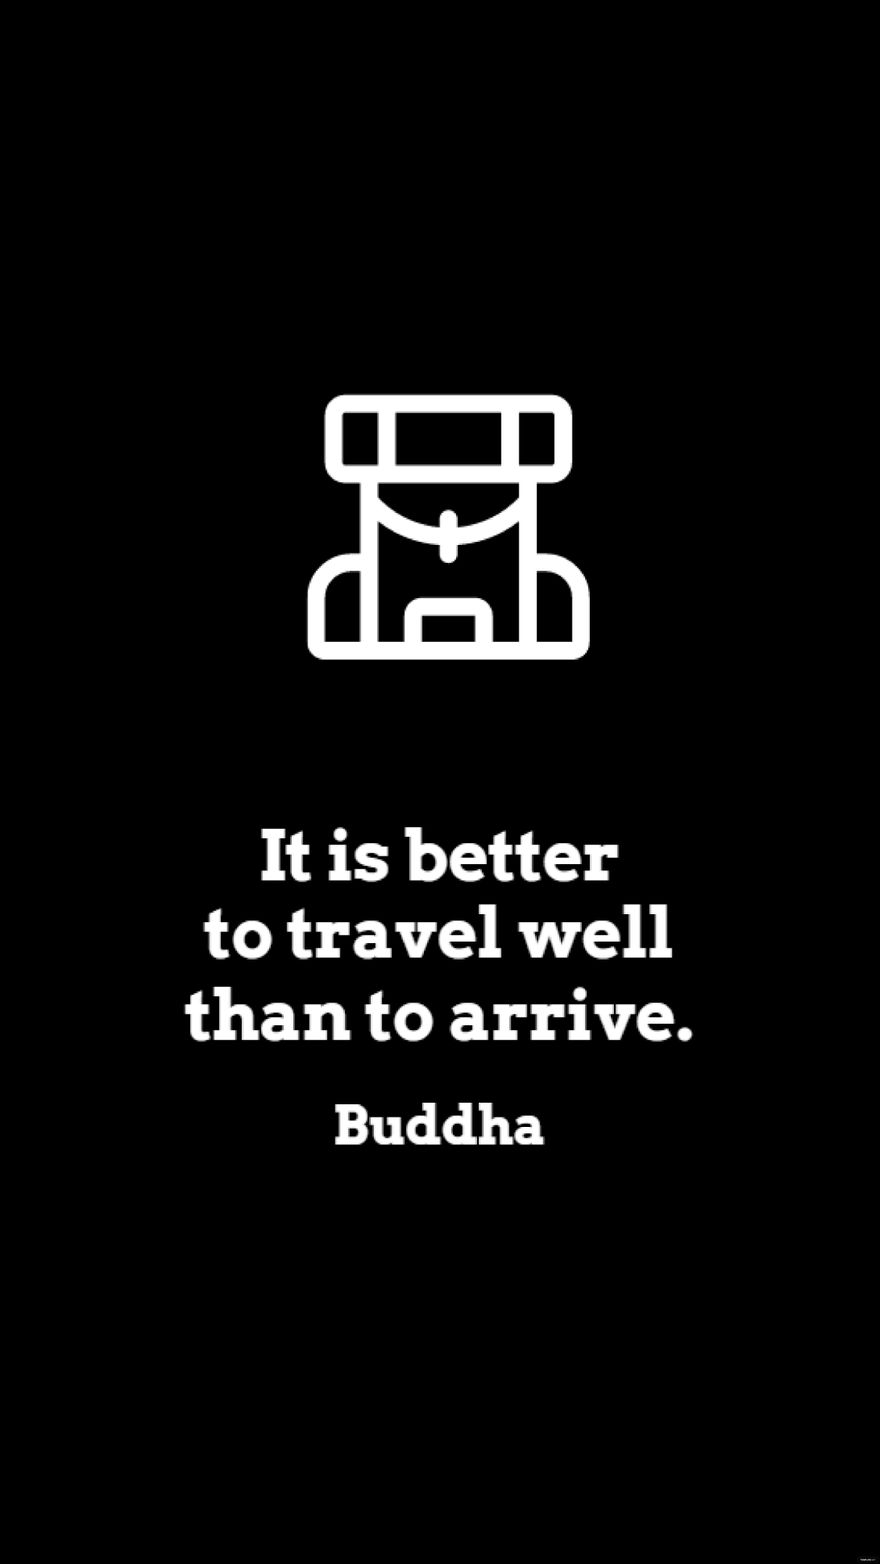 Free Buddha - It is better to travel well than to arrive. in JPG